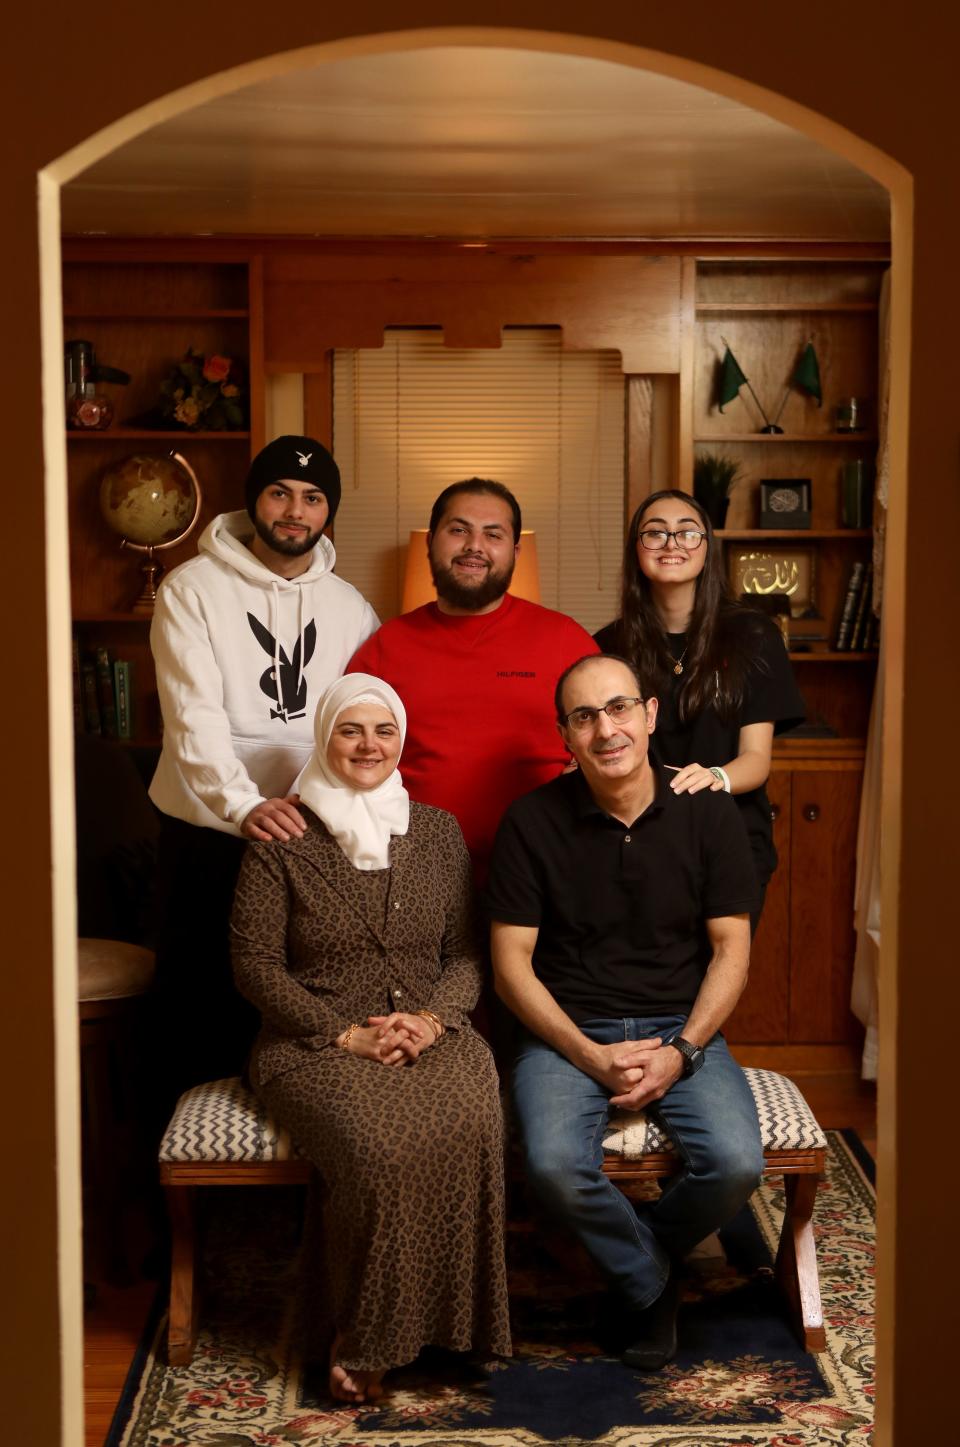 Sabah Abo Hamza and Mohanad Ghanam are shown with their children, Yazan Ghanam, 19, Ramez Ghanam, 21, and Nanse Ghanam, 14. The family arrived in New Jersey approximately five years ago as Syrian refugees. Thursday, Nov. 11, 2021.